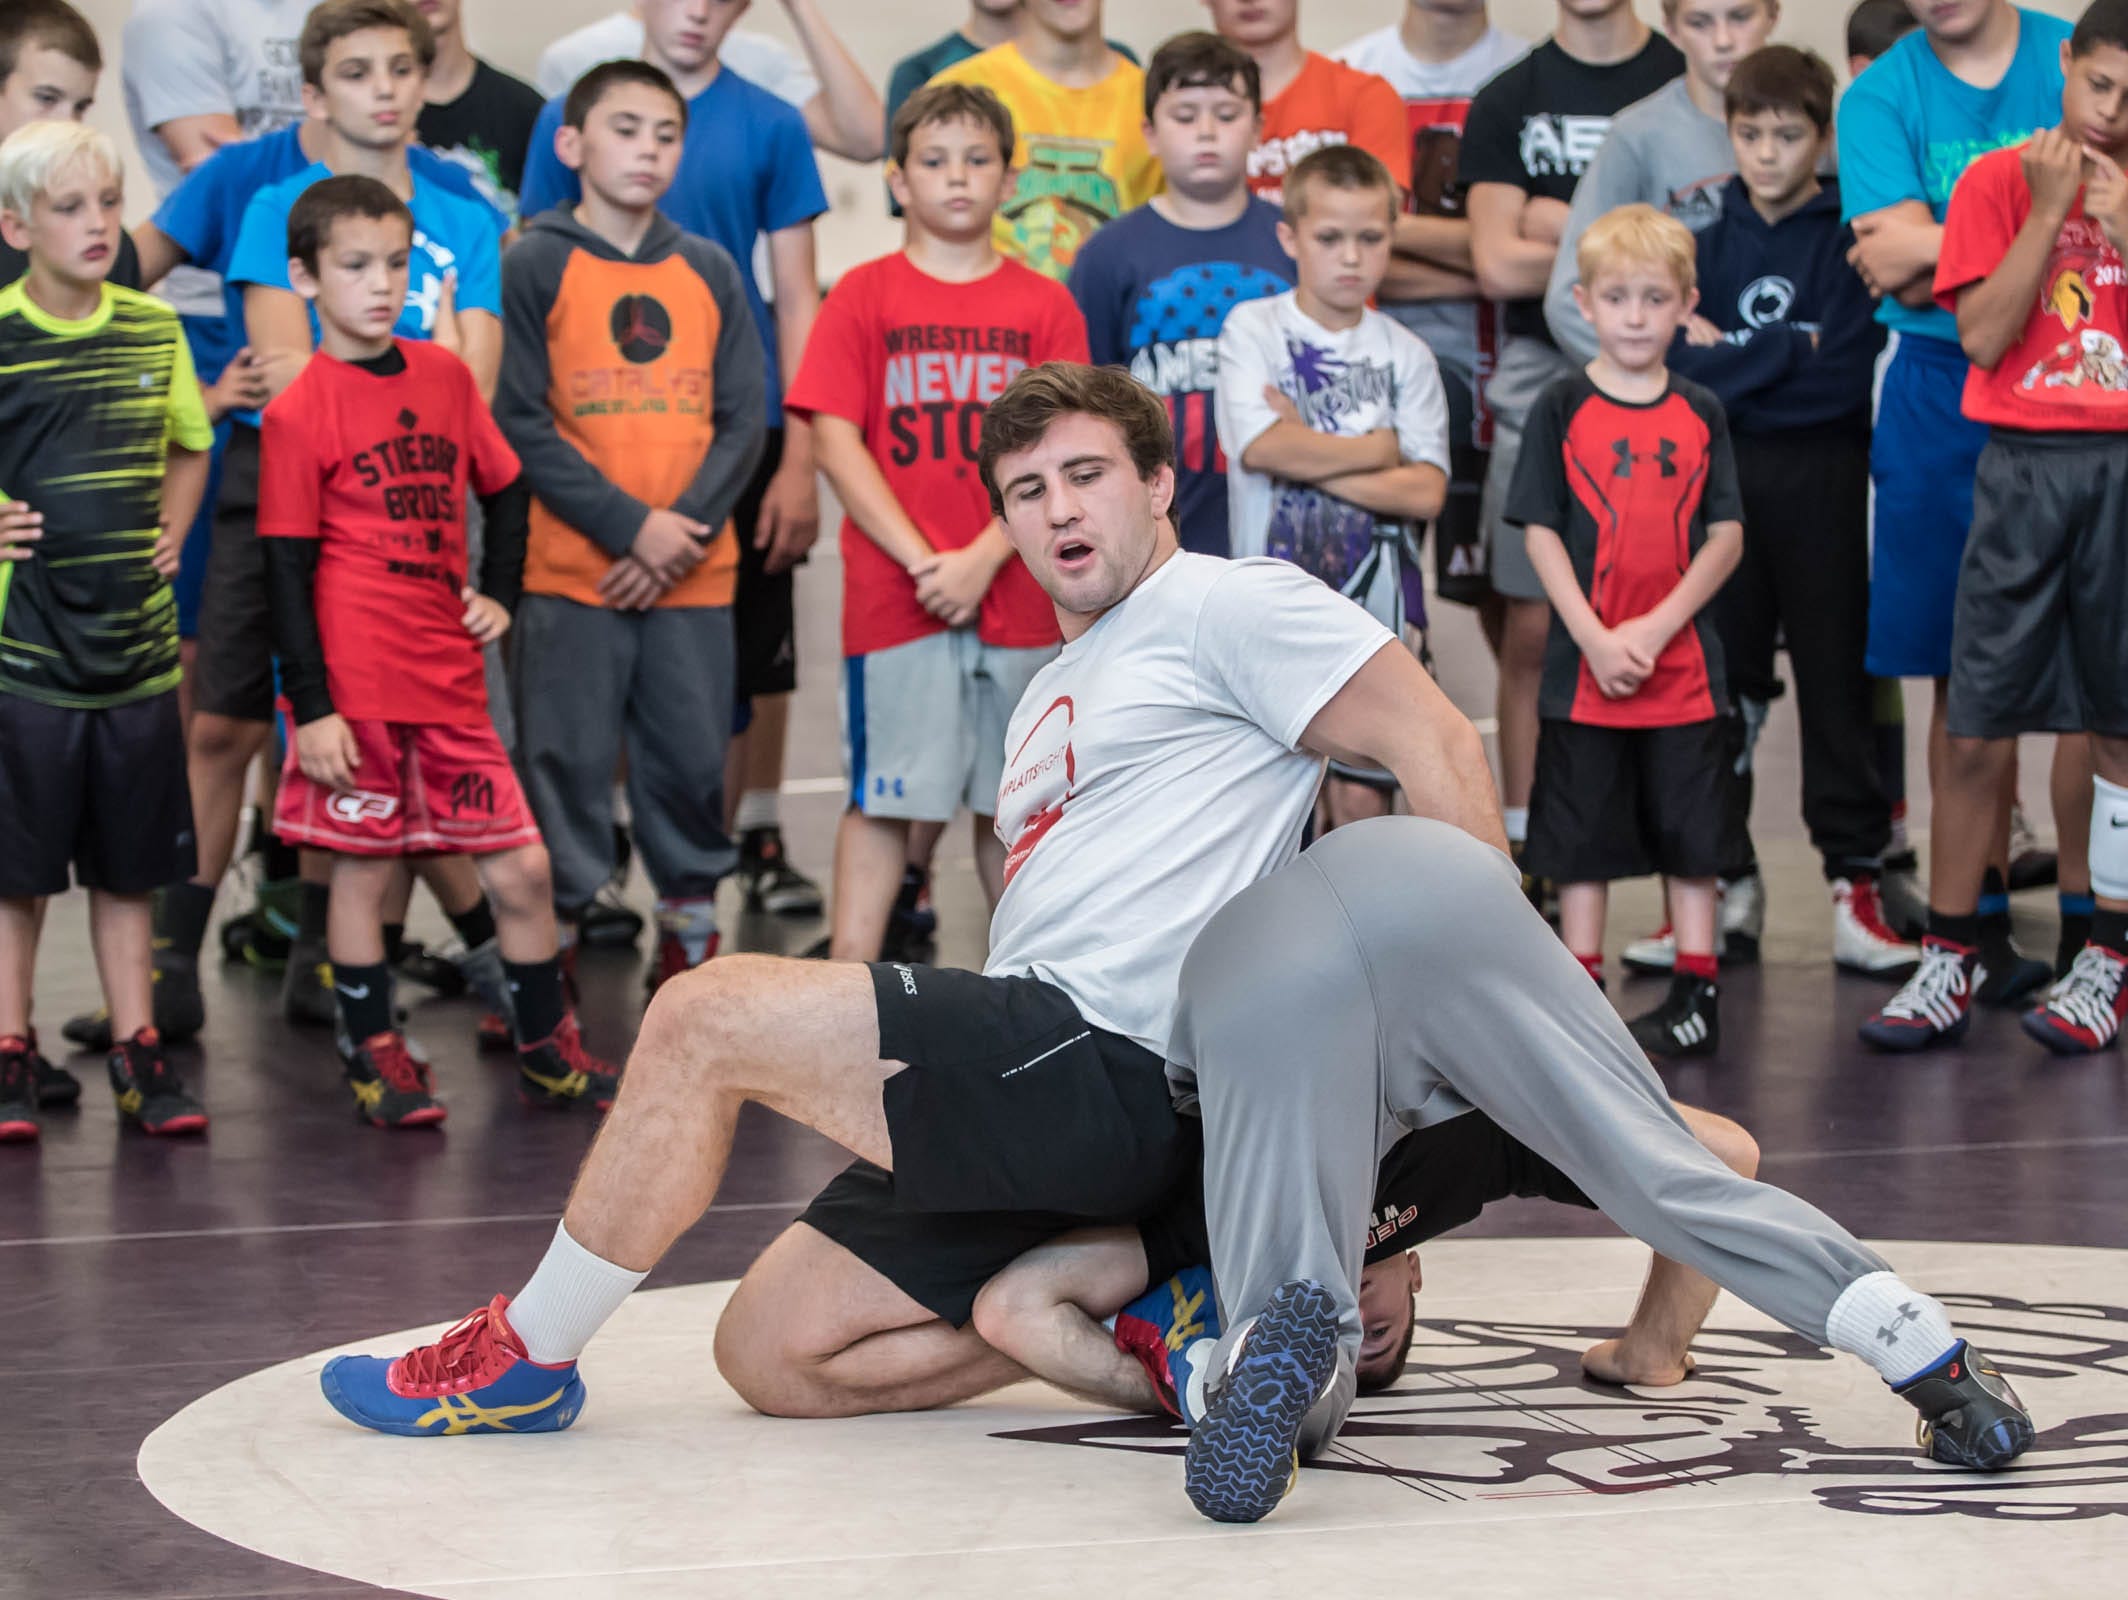 Gabe Dean, NCAA wrestling champ from Cornell, instructs kids at Rob Waller's All-American Wrestling Camps at Lakeview High School on Wednesday.